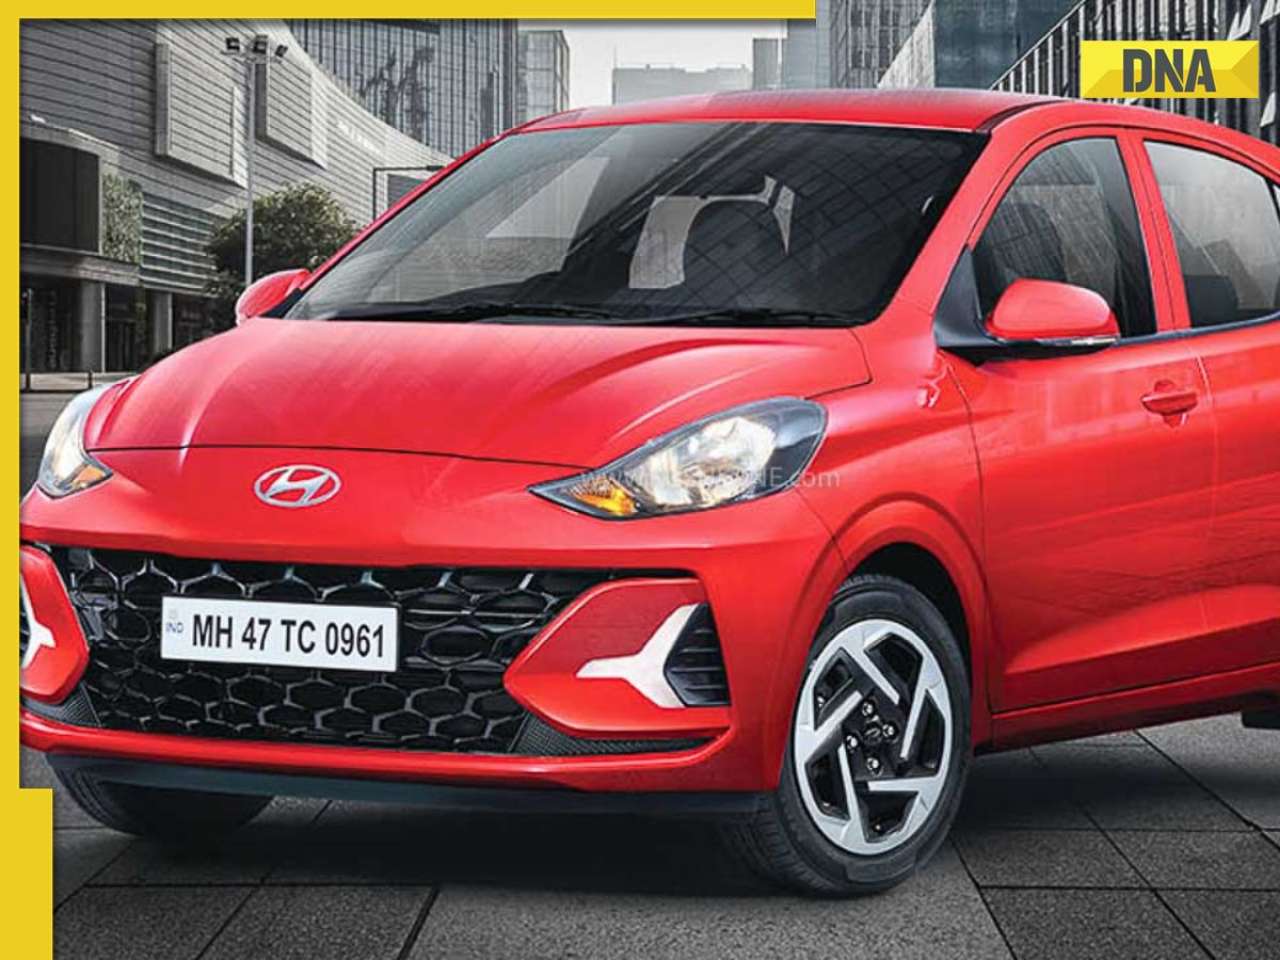 Hyundai Grand i10 Nios Corporate edition launched, priced at Rs 6.93 lakh